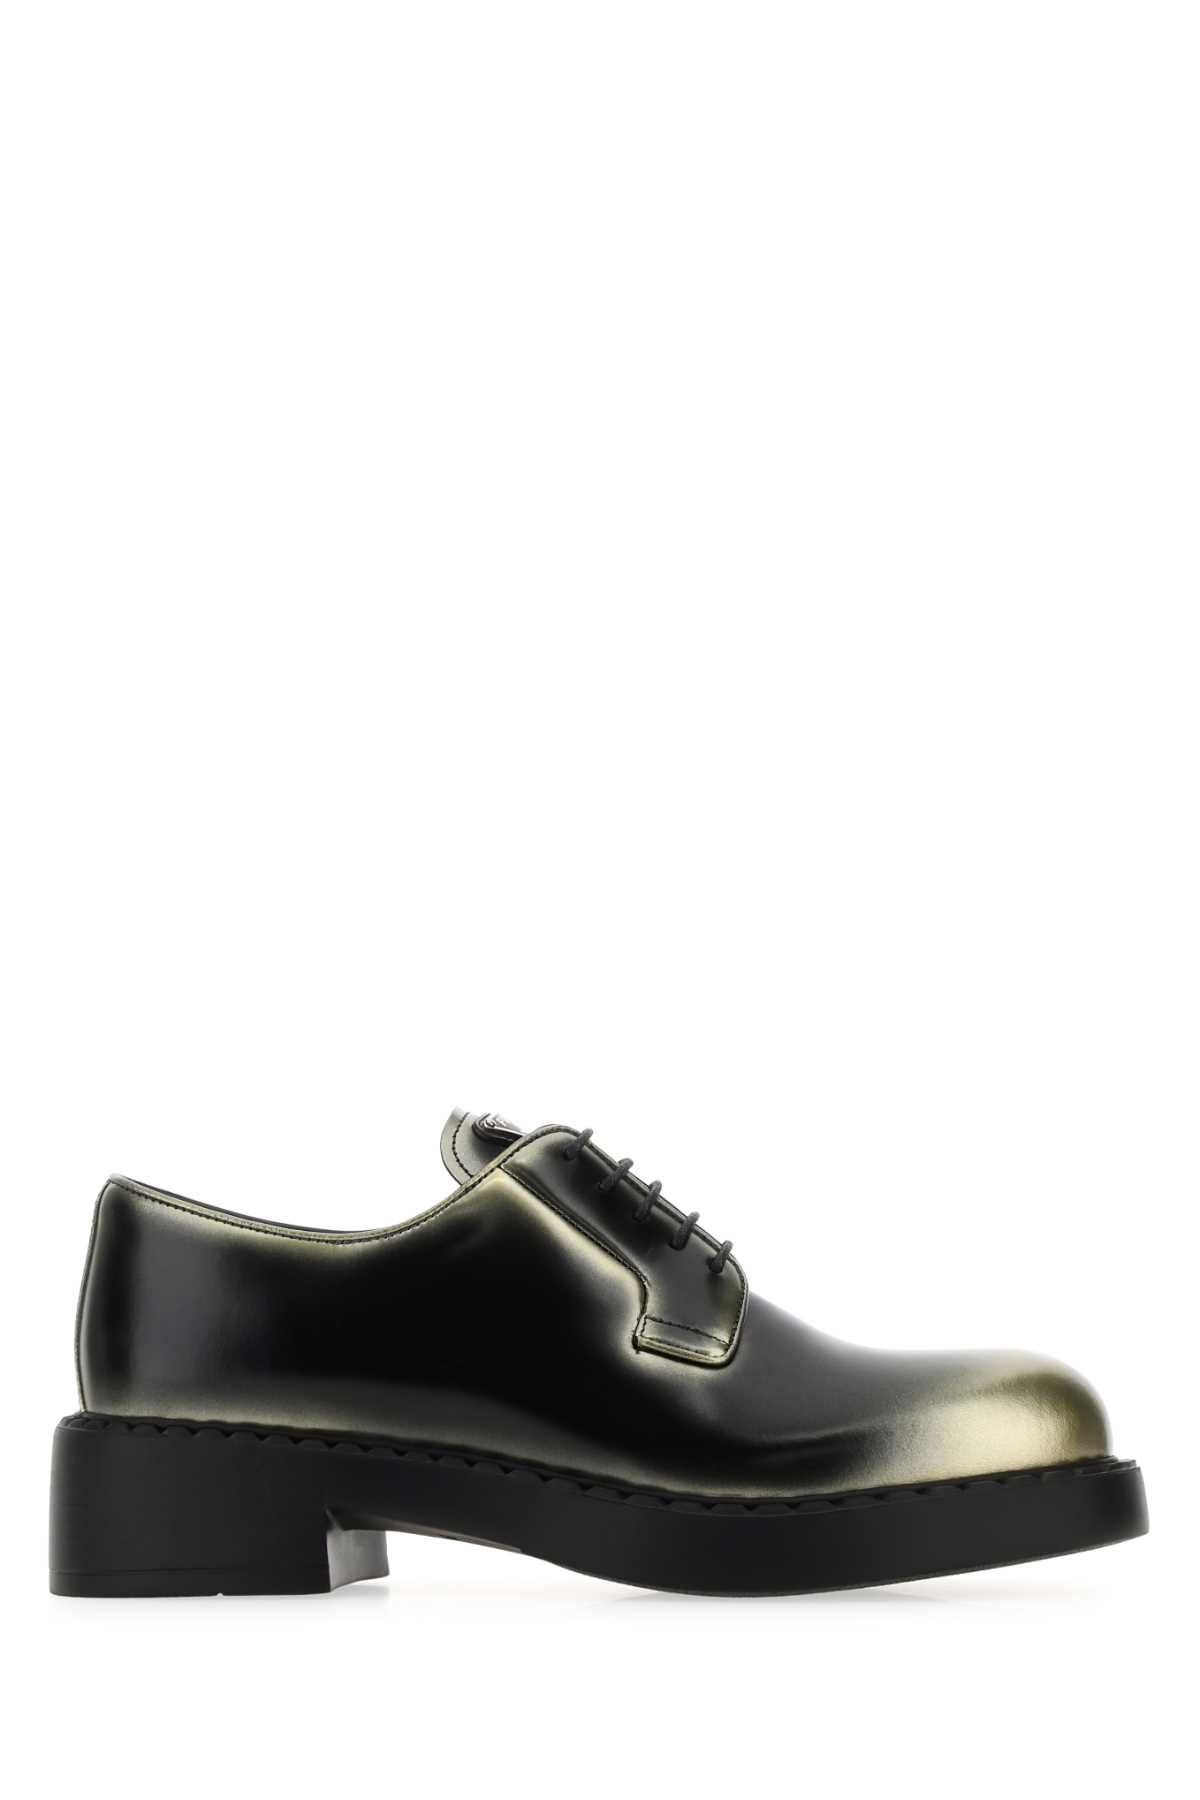 Prada Two-tone Leather Lace-up Shoes